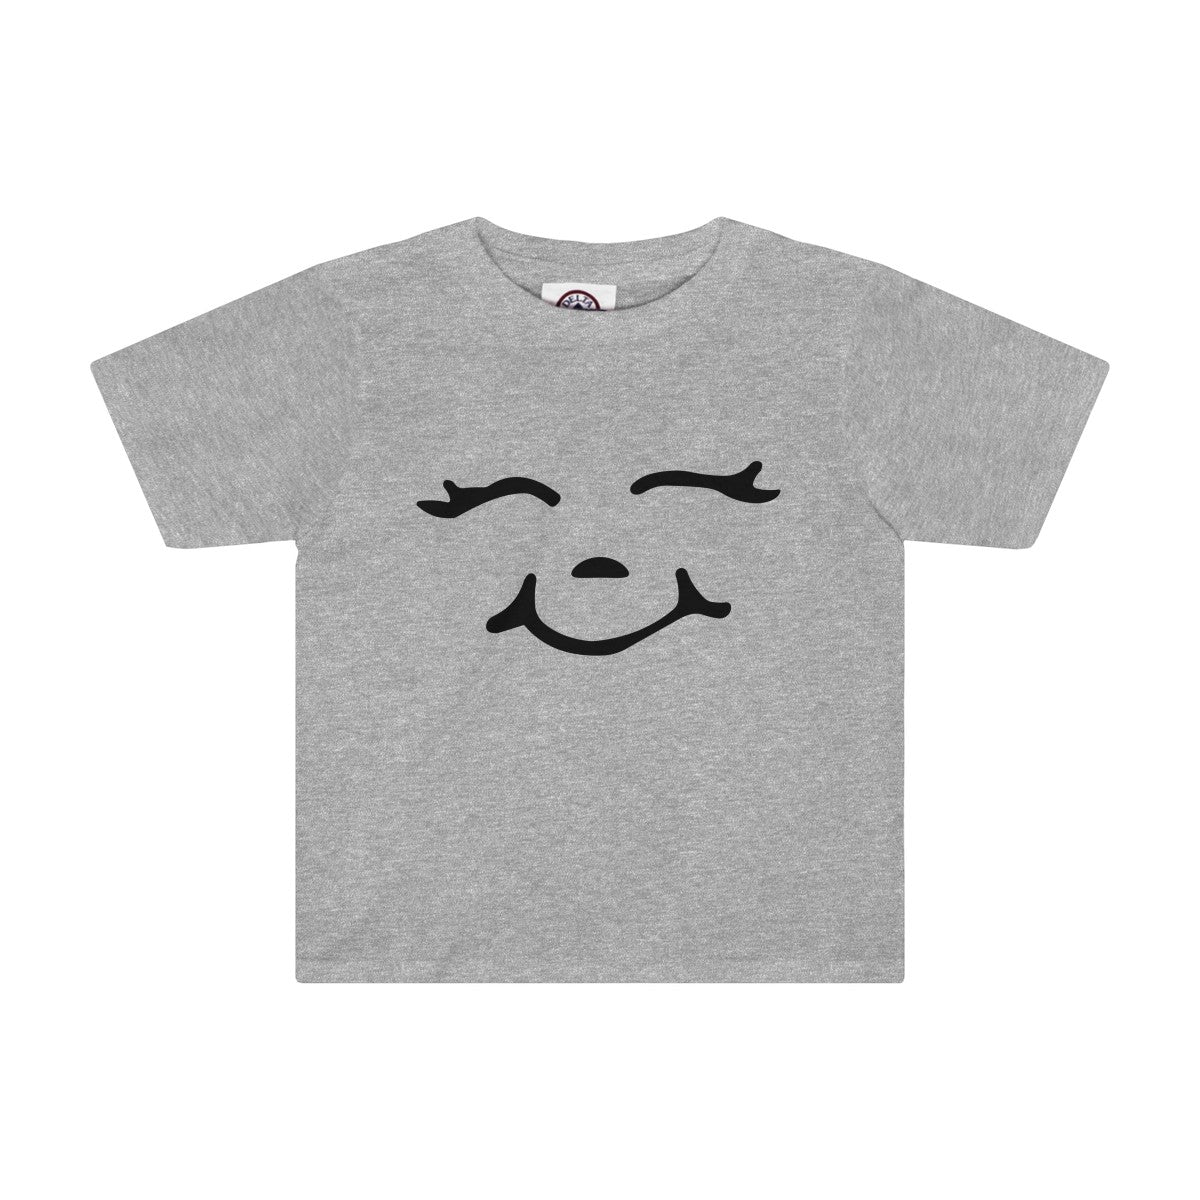 Cute Smile Toddler Tee-Kids clothes-PureDesignTees